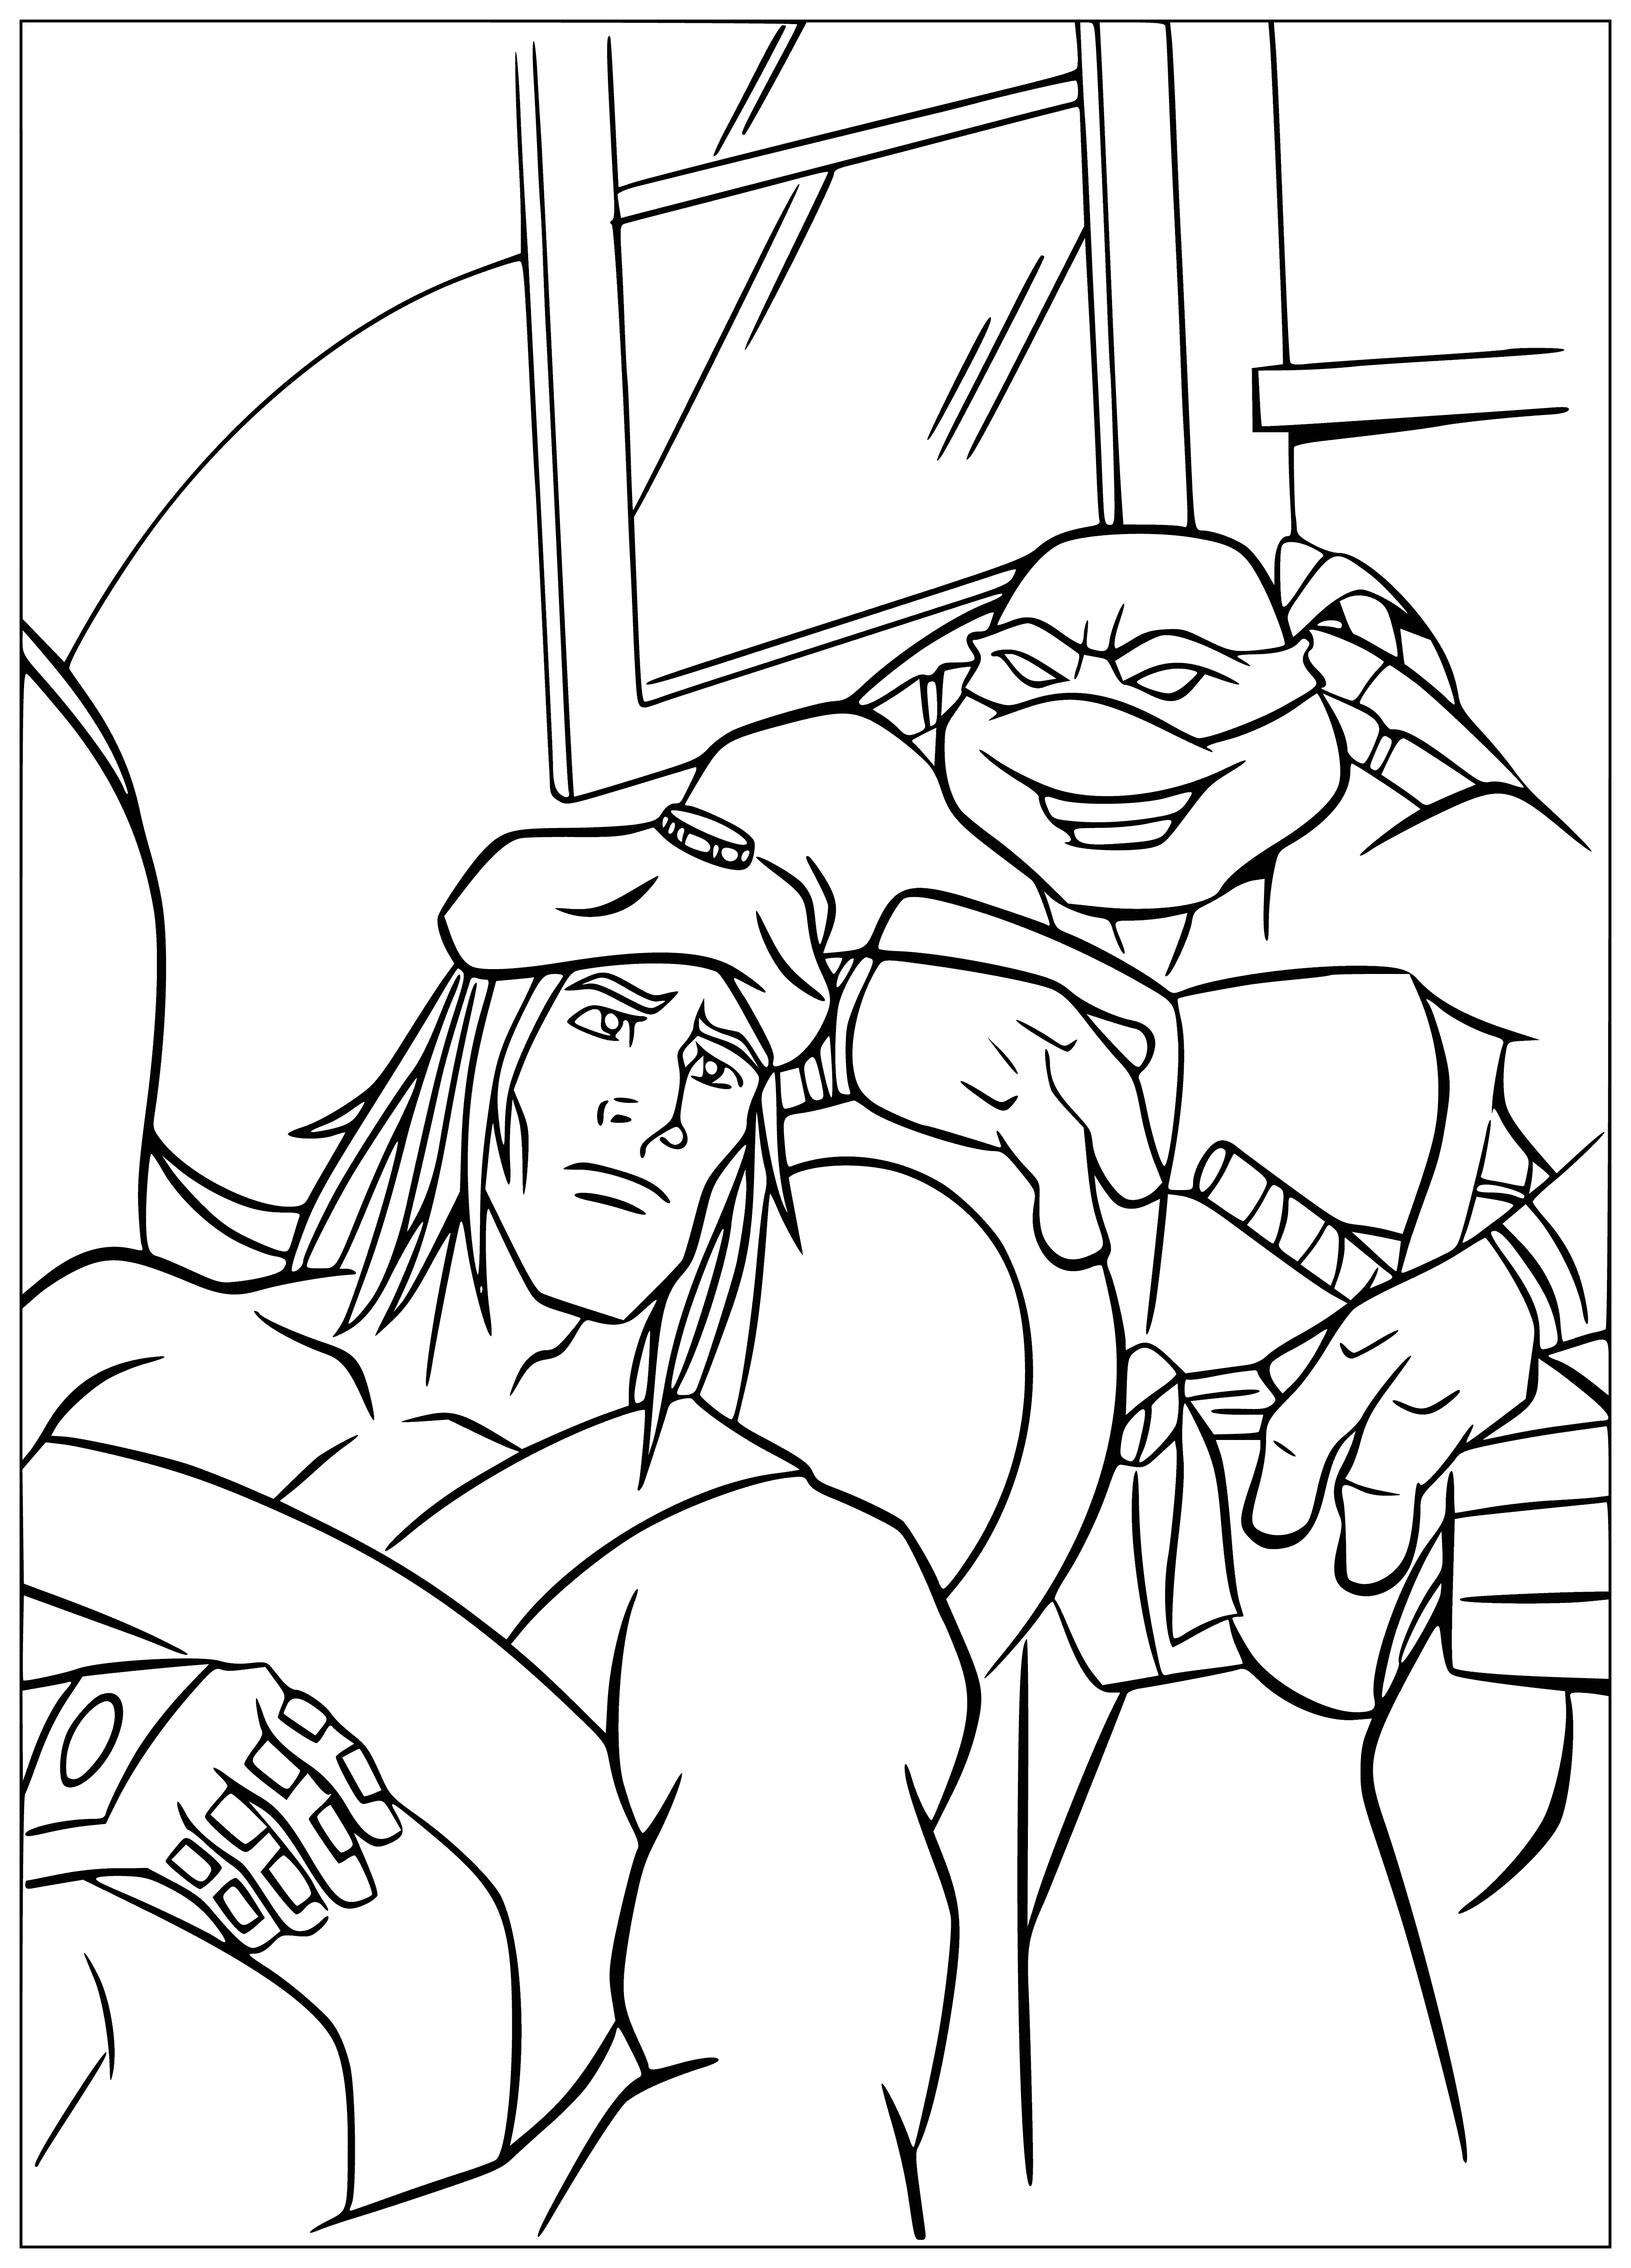 coloring page: Teenage mutant Ninja Turtles fight crime, wear masks & wield weapons to protect their city. Led by Leonardo, other members are Donatello, Raphael & Michelangelo.